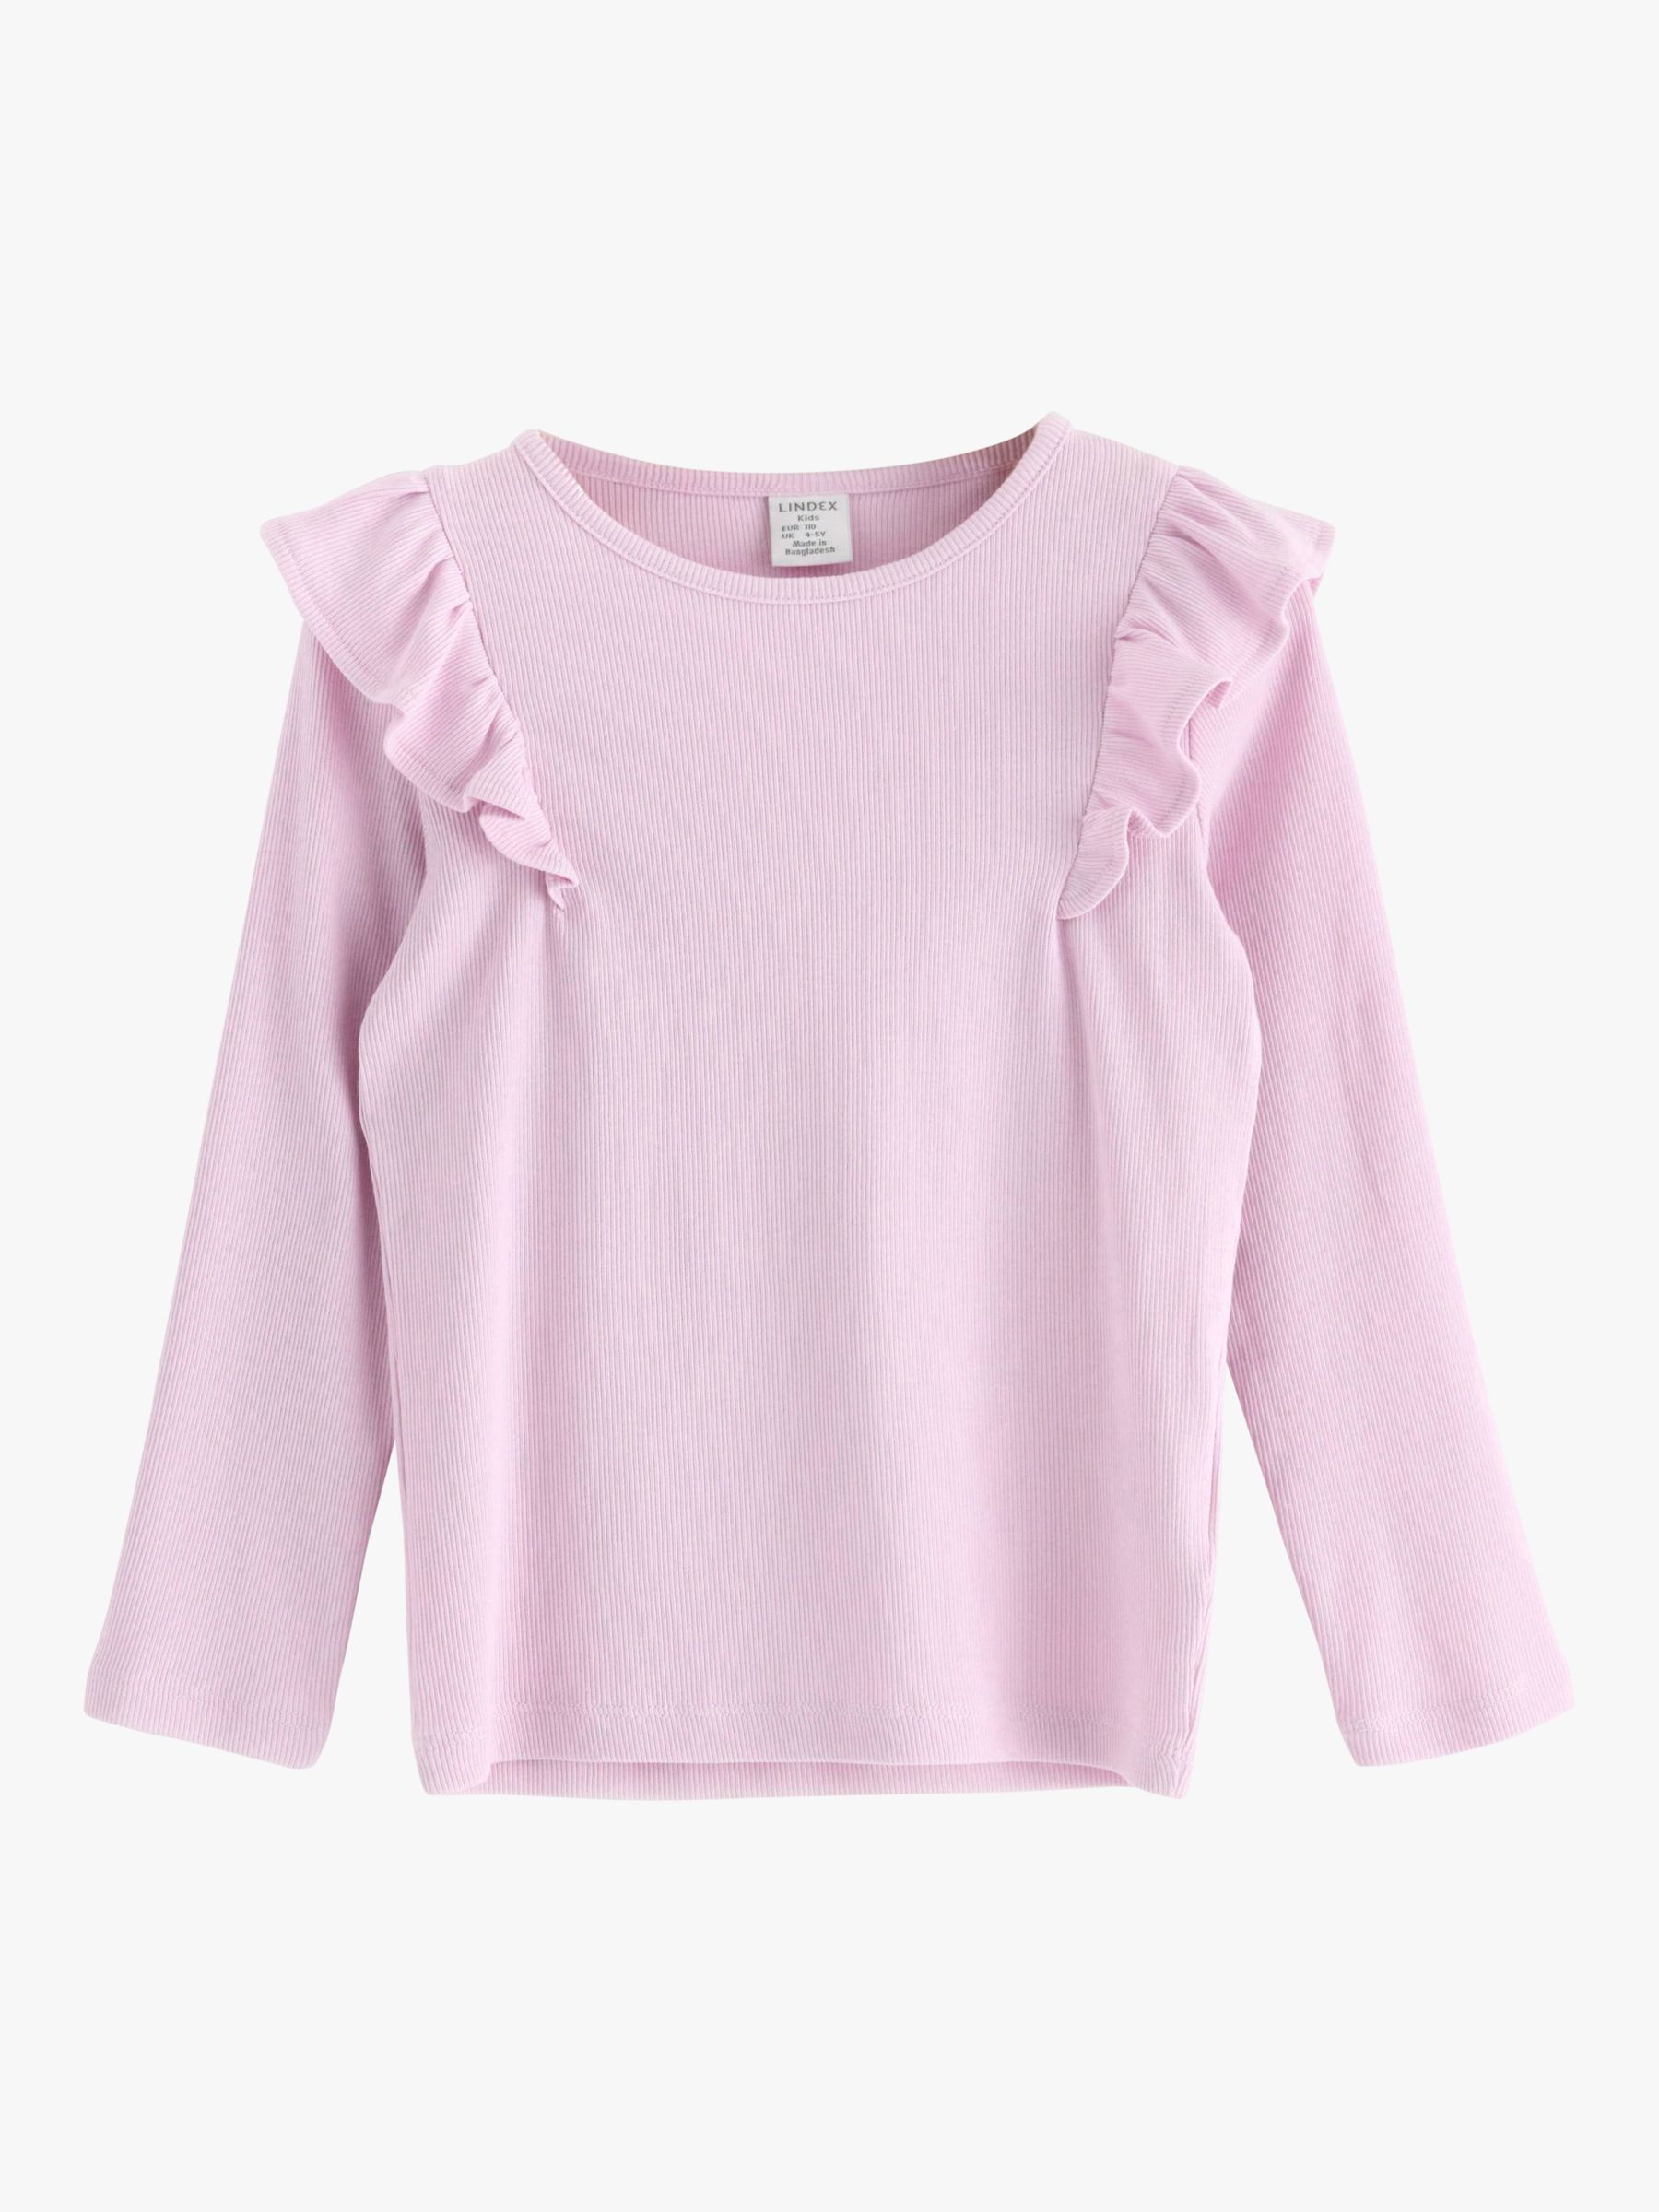 Lindex Kids' Organic Cotton Blend Solid Frill Detail Top, Dusty Pink, 18-24 months